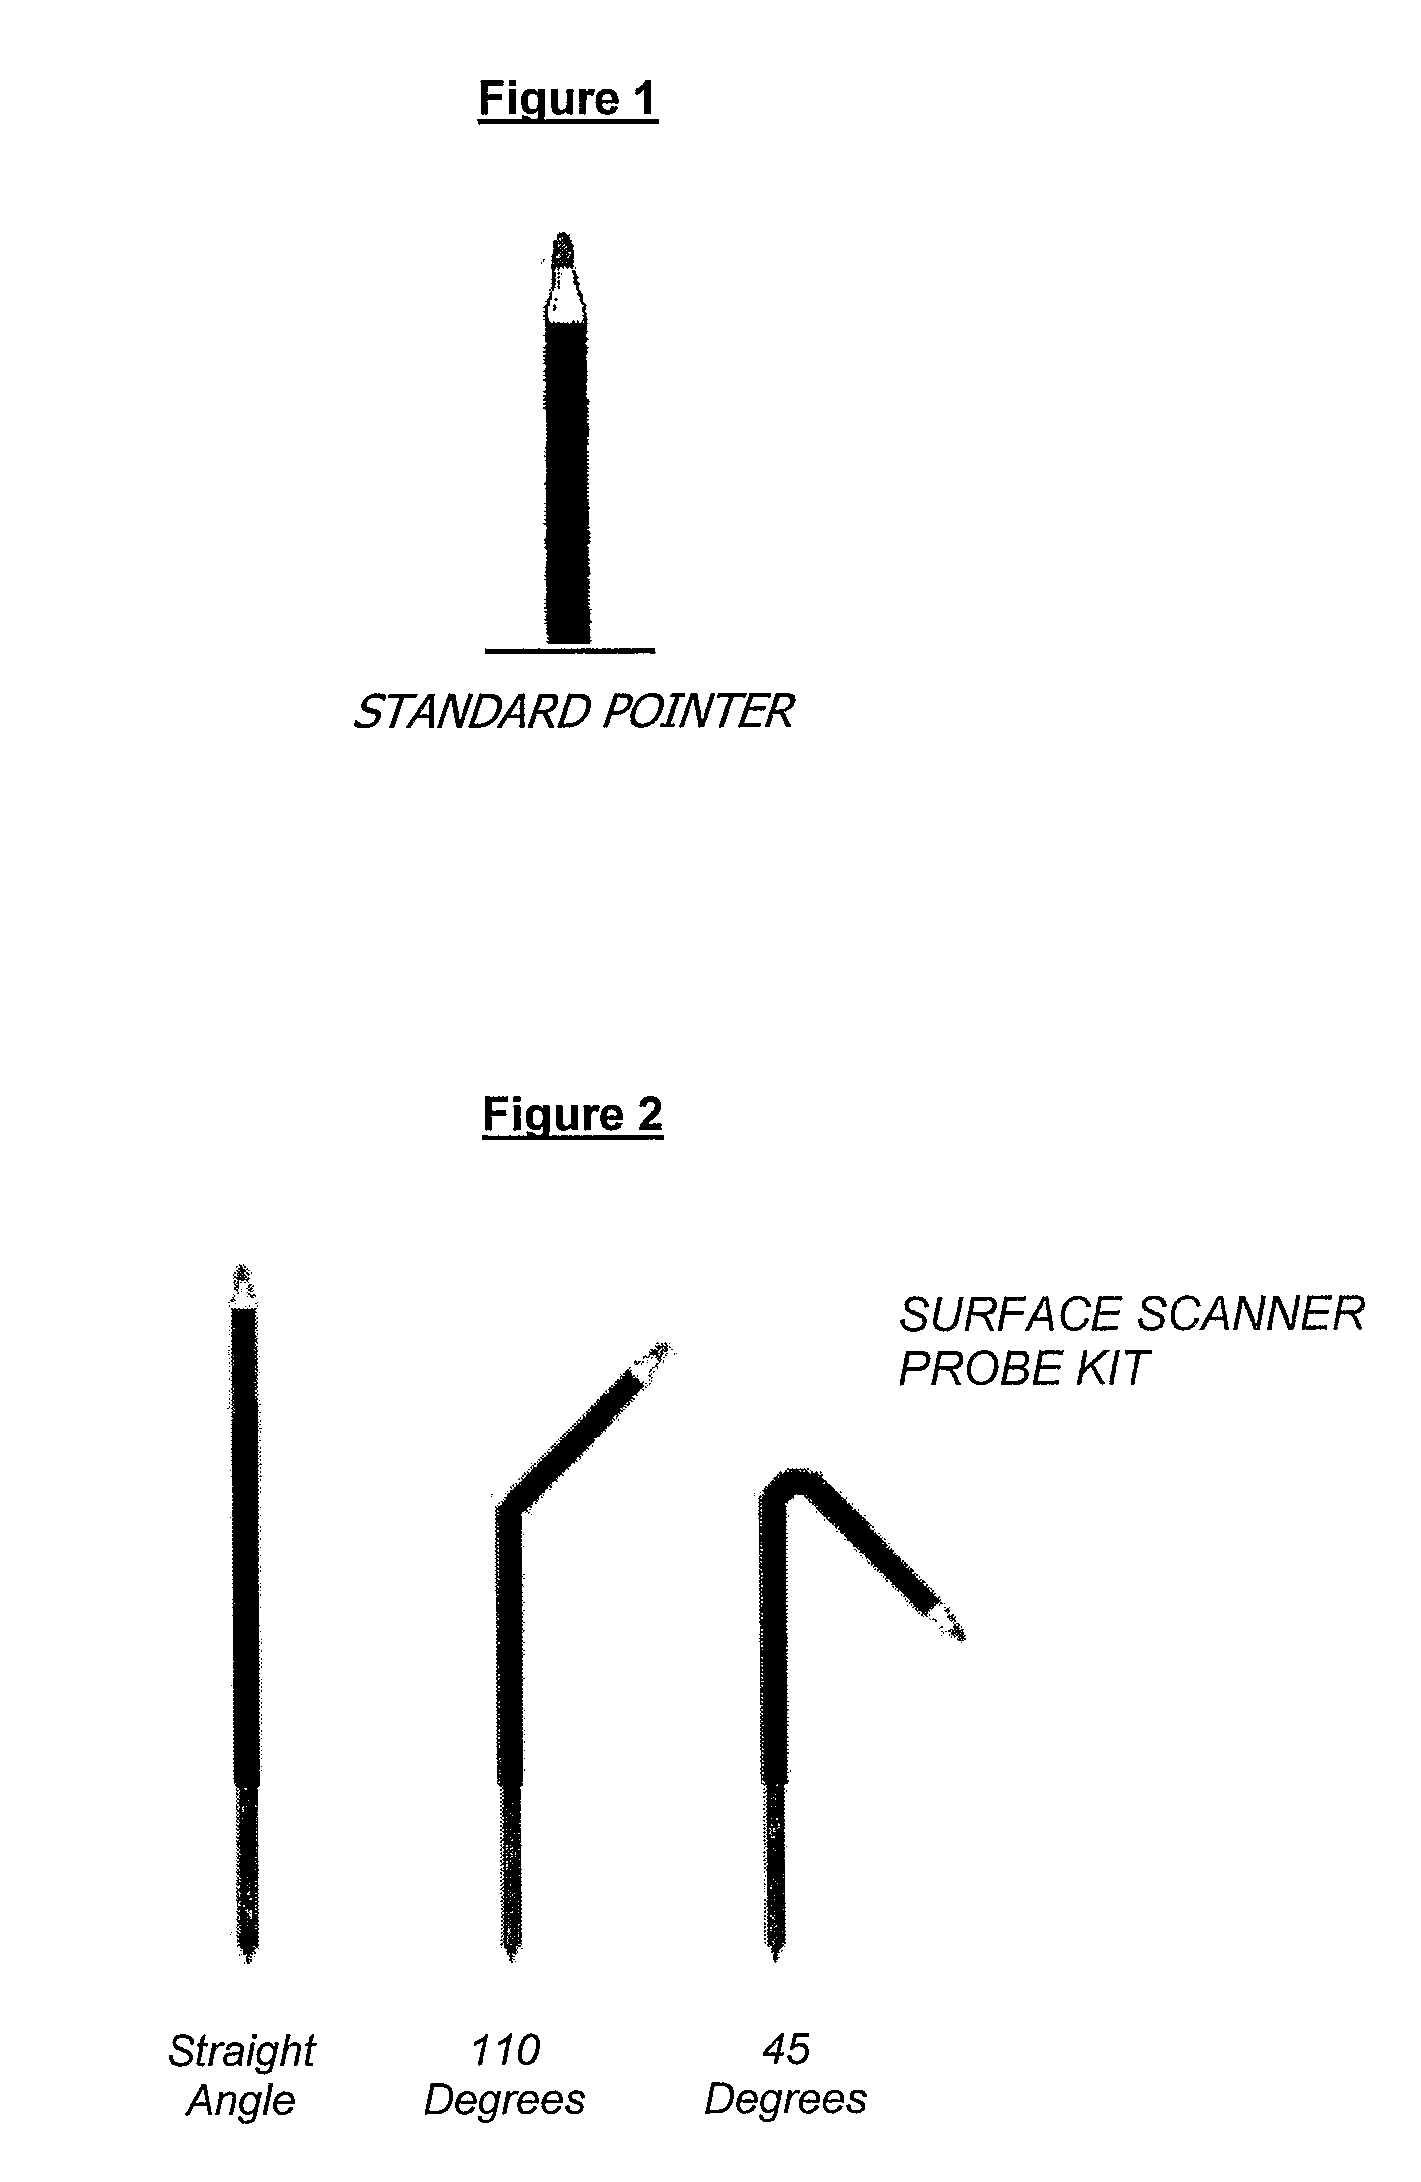 Apparatus for Digitalization of Dental Structures, and Method for Recognition of Three-Dimensional Data of Dental Structures